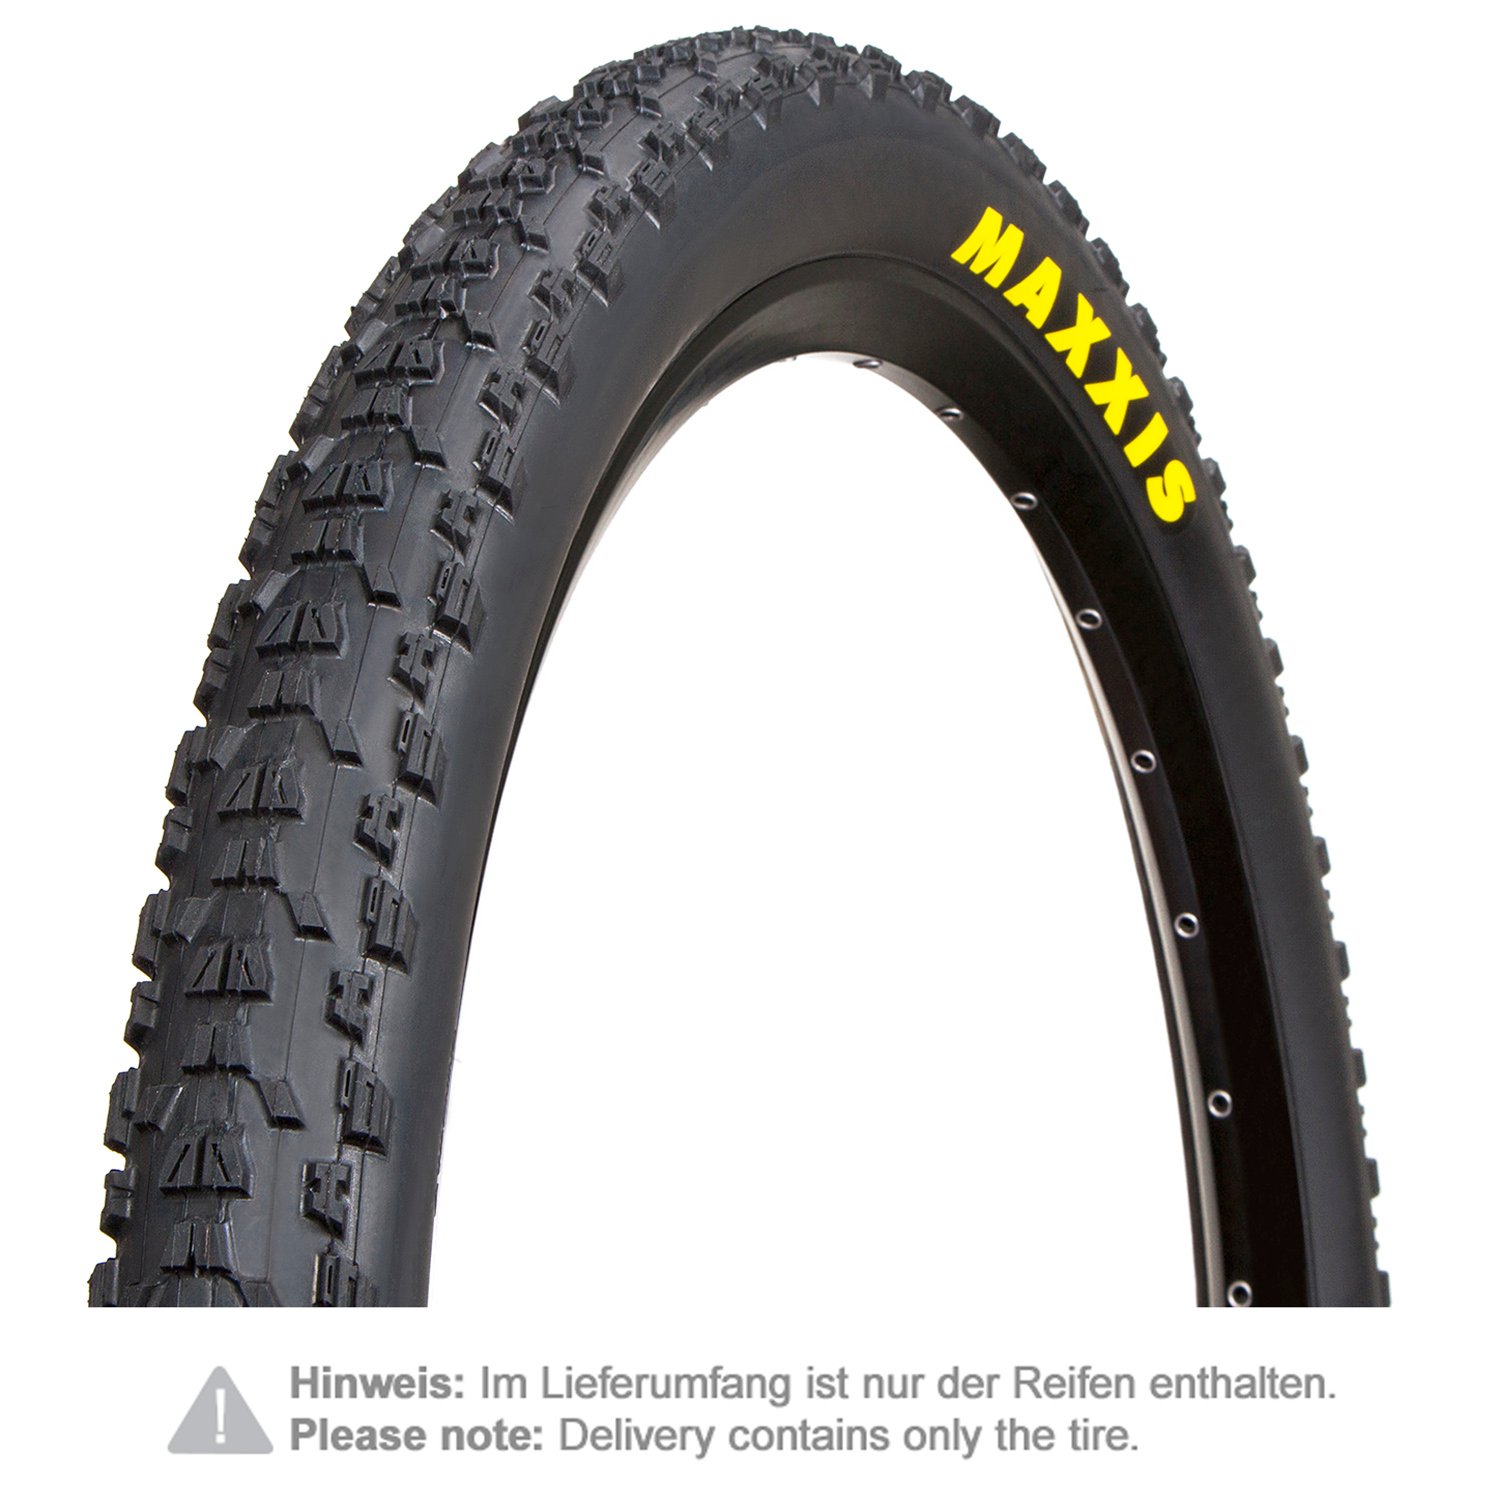 Maxxis MTB Tire Ardent Black, 27.5 x 2.25 Inches, Tubeless Ready, EXO Dual, Foldable